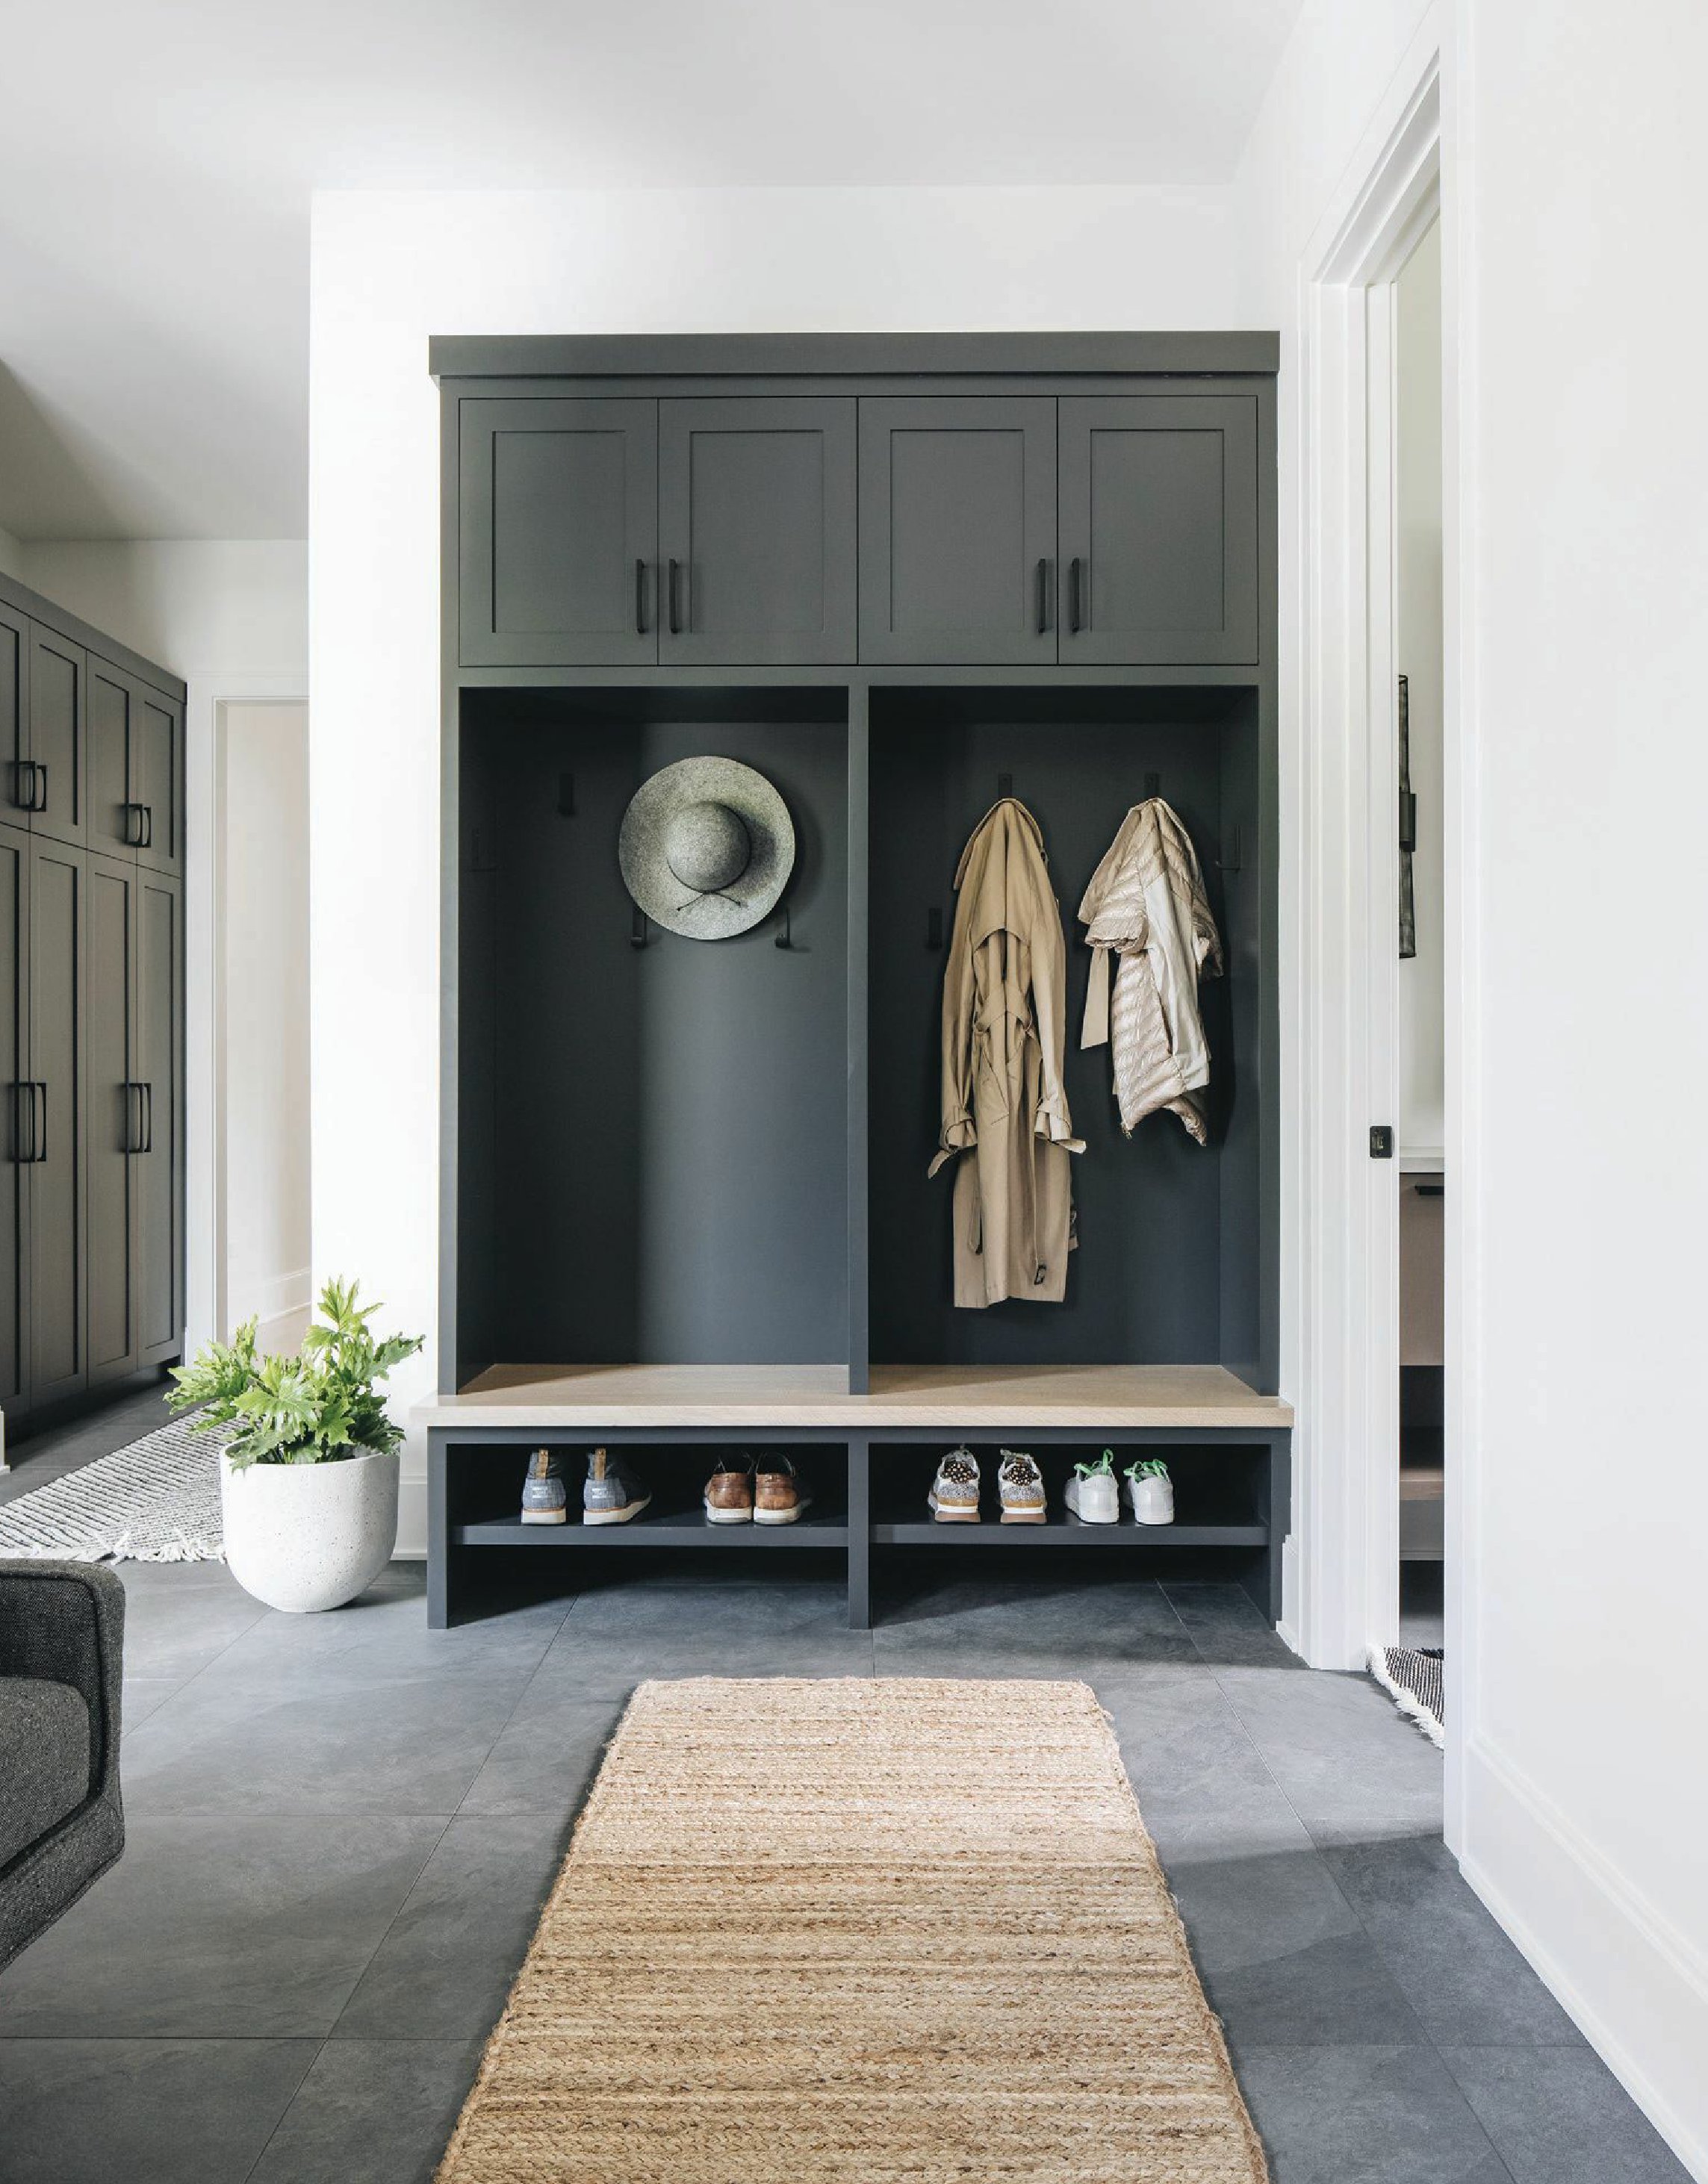 Custom cabinetry by Wood Quality Cabinets, tile by Virginia Tile and a jute rug by Amy Storm & Company make the mudroom pop. Photographed by Stoffer Photography Interiors